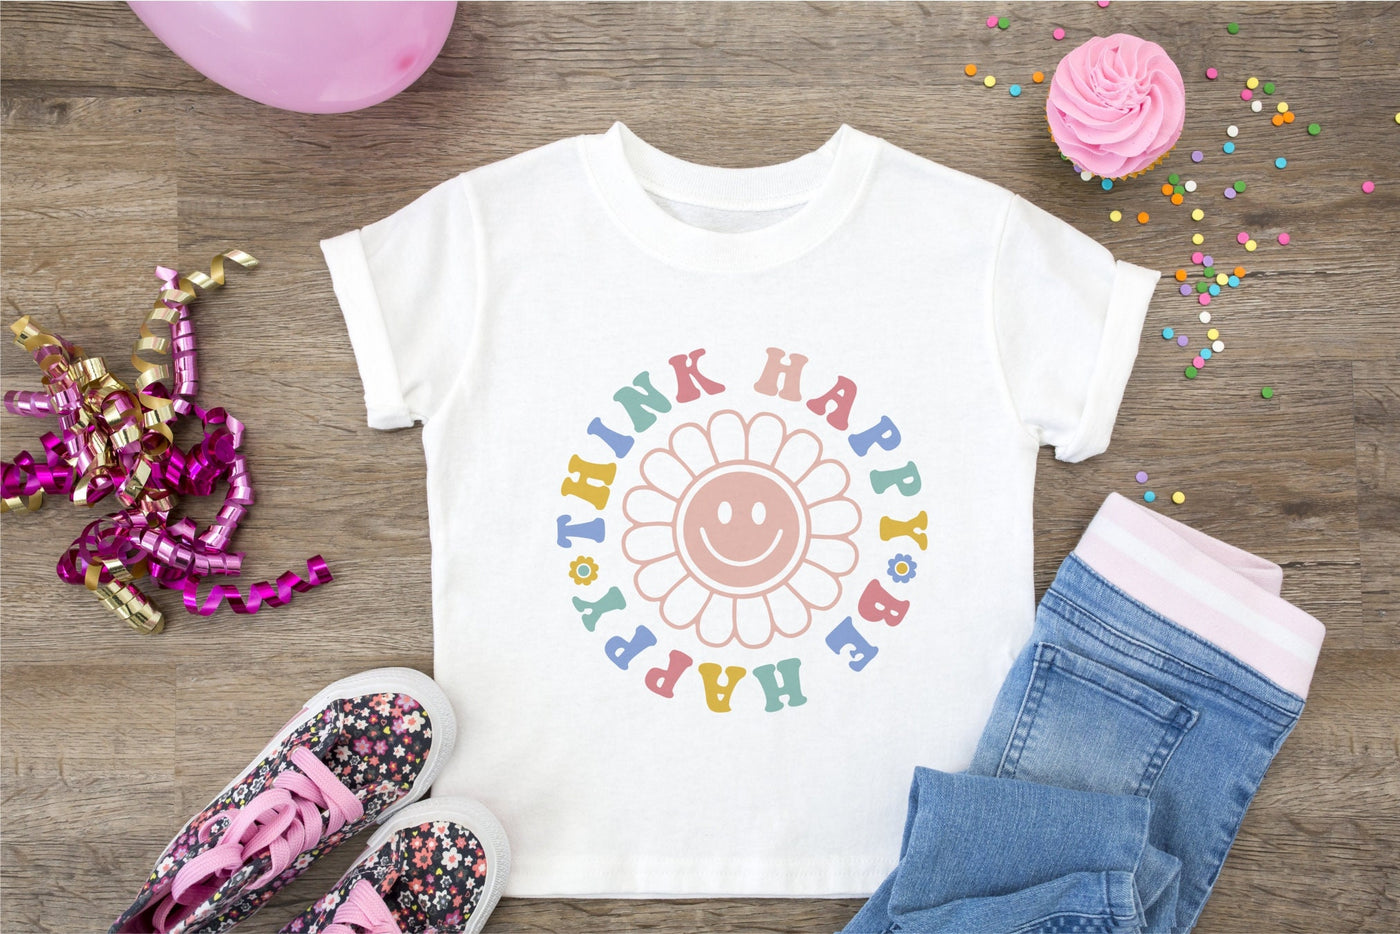 Happy Thoughts Shirt, Happiness Shirt, Girl's Smile Shirt, Hippie Happy Shirt, Happy Face Tee, Daisy Tee, Retro Smiley Face, Think Happy